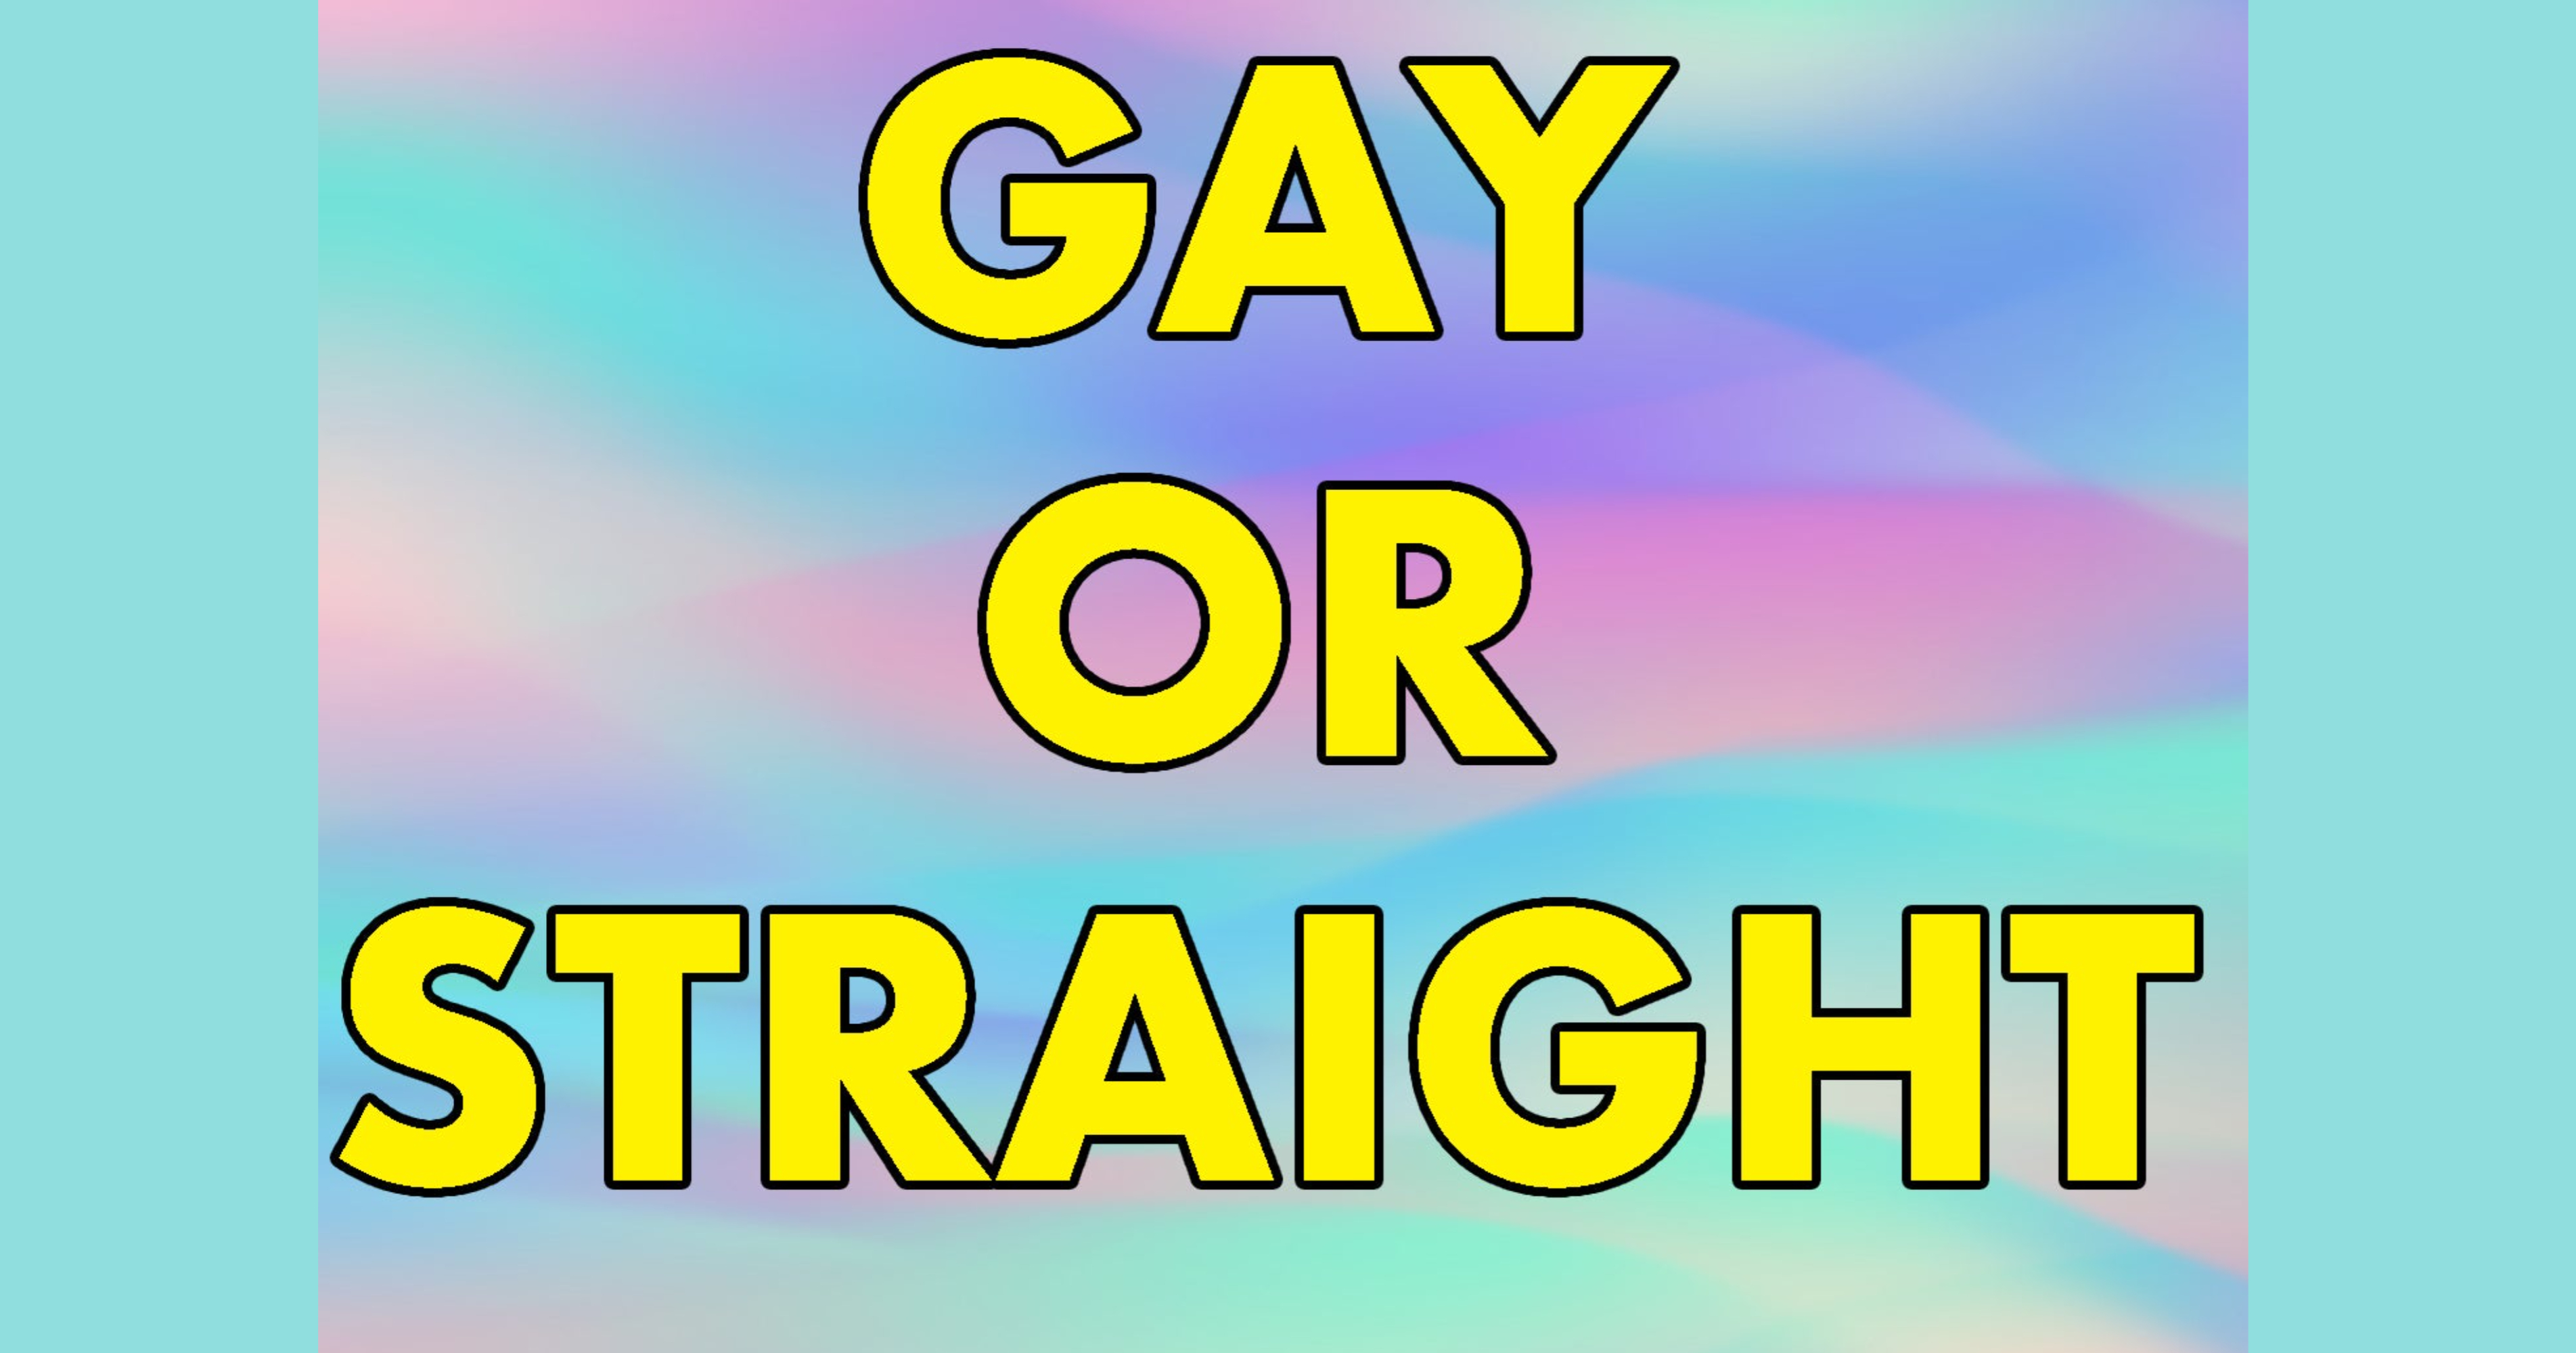 Are you gay test questions